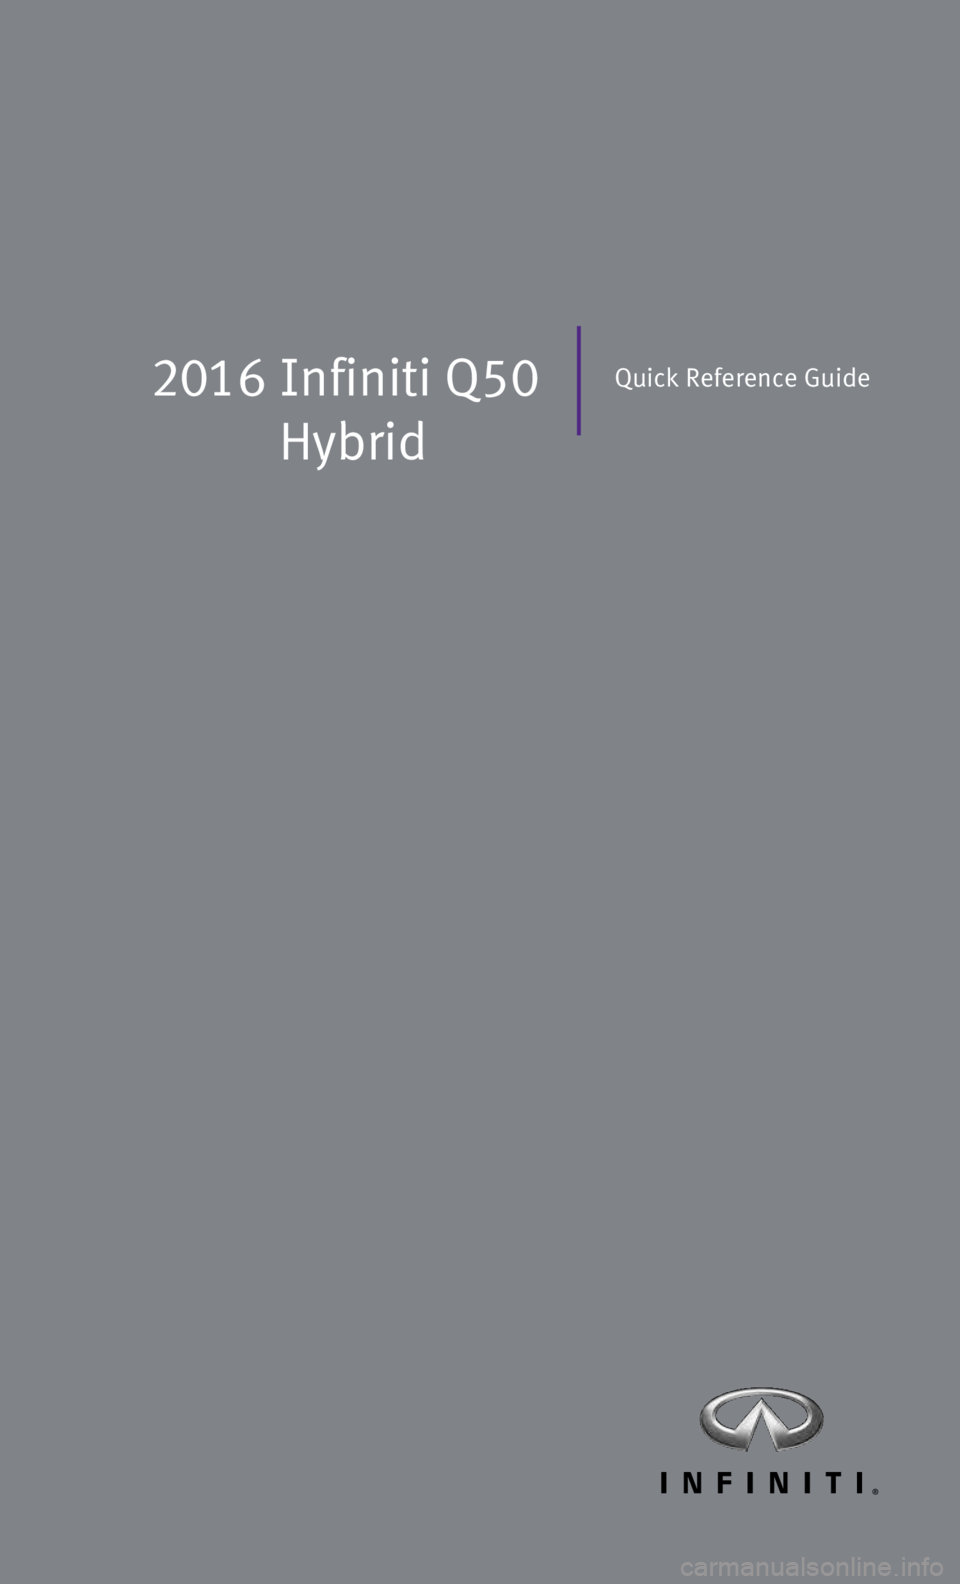 INFINITI Q50 HYBRID 2016  Quick Reference Guide 2016  Infiniti Q50 
HybridQuick Reference Guide 